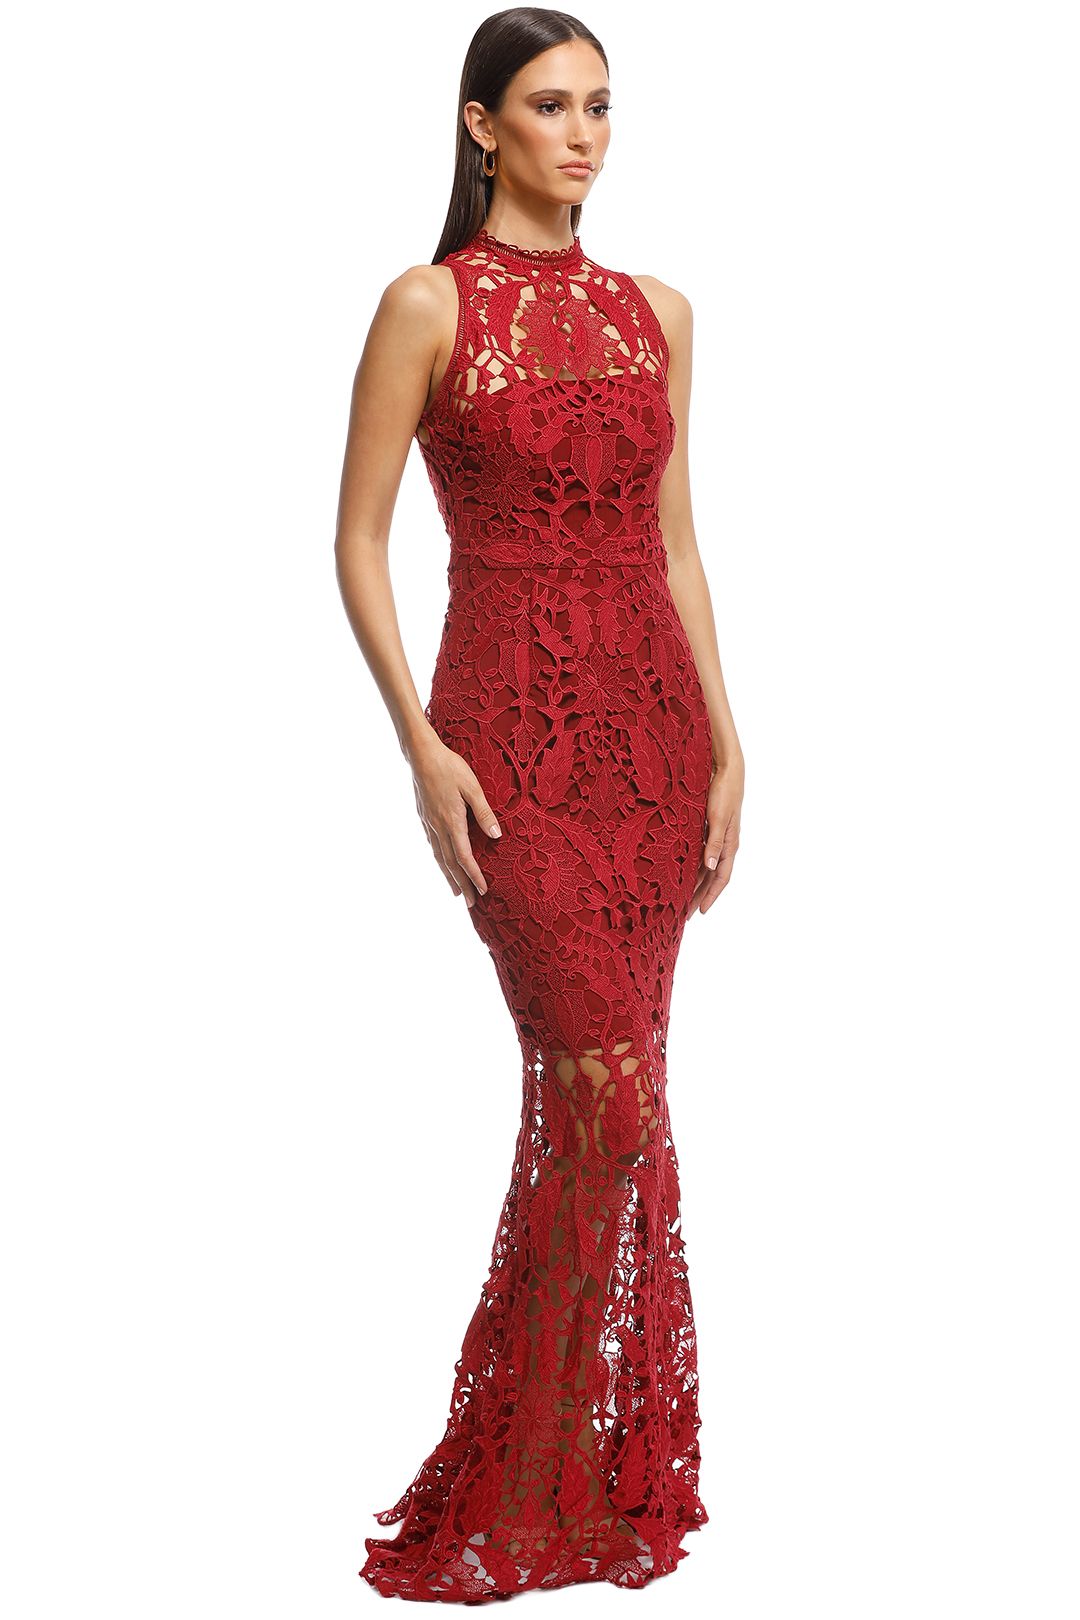 Prosecco Gown in Red by Grace & Hart for Rent | GlamCorner